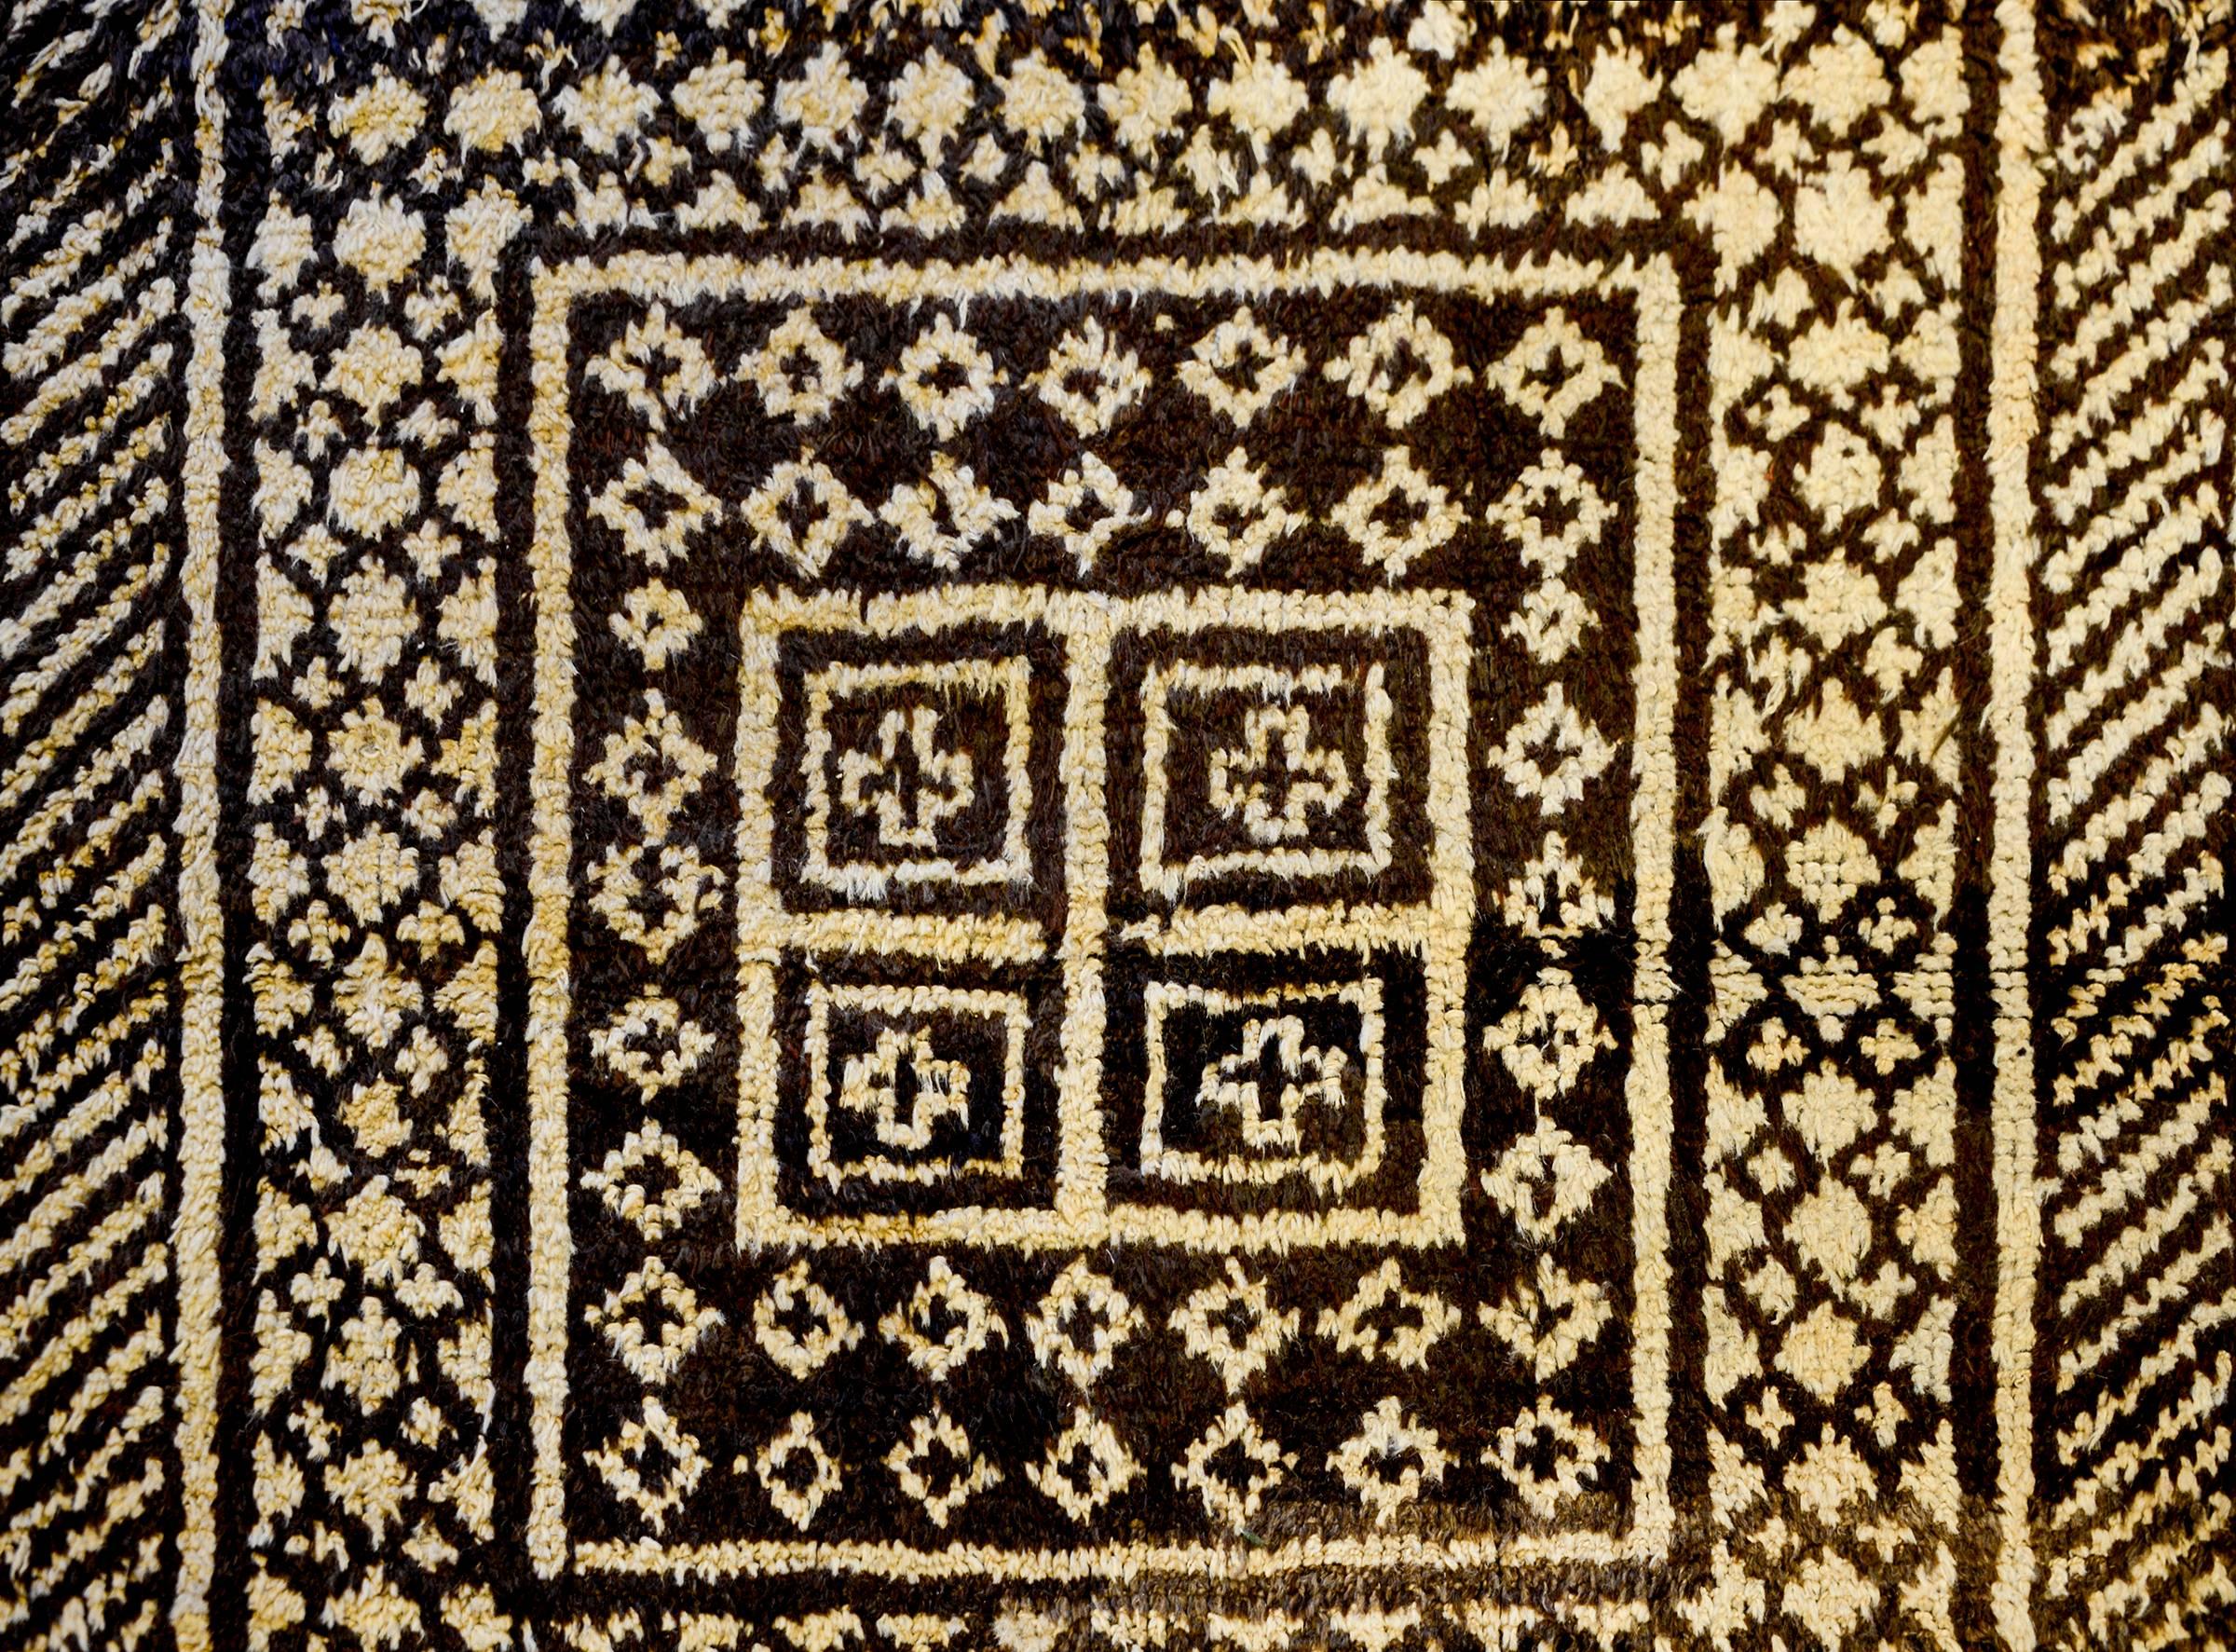 A fantastic 19th century Persian Gabbeh rug with an amazing composition of geometric patterns including diamonds, squares, zigzags, checkerboards and stripes, all woven in natural undyed wool.